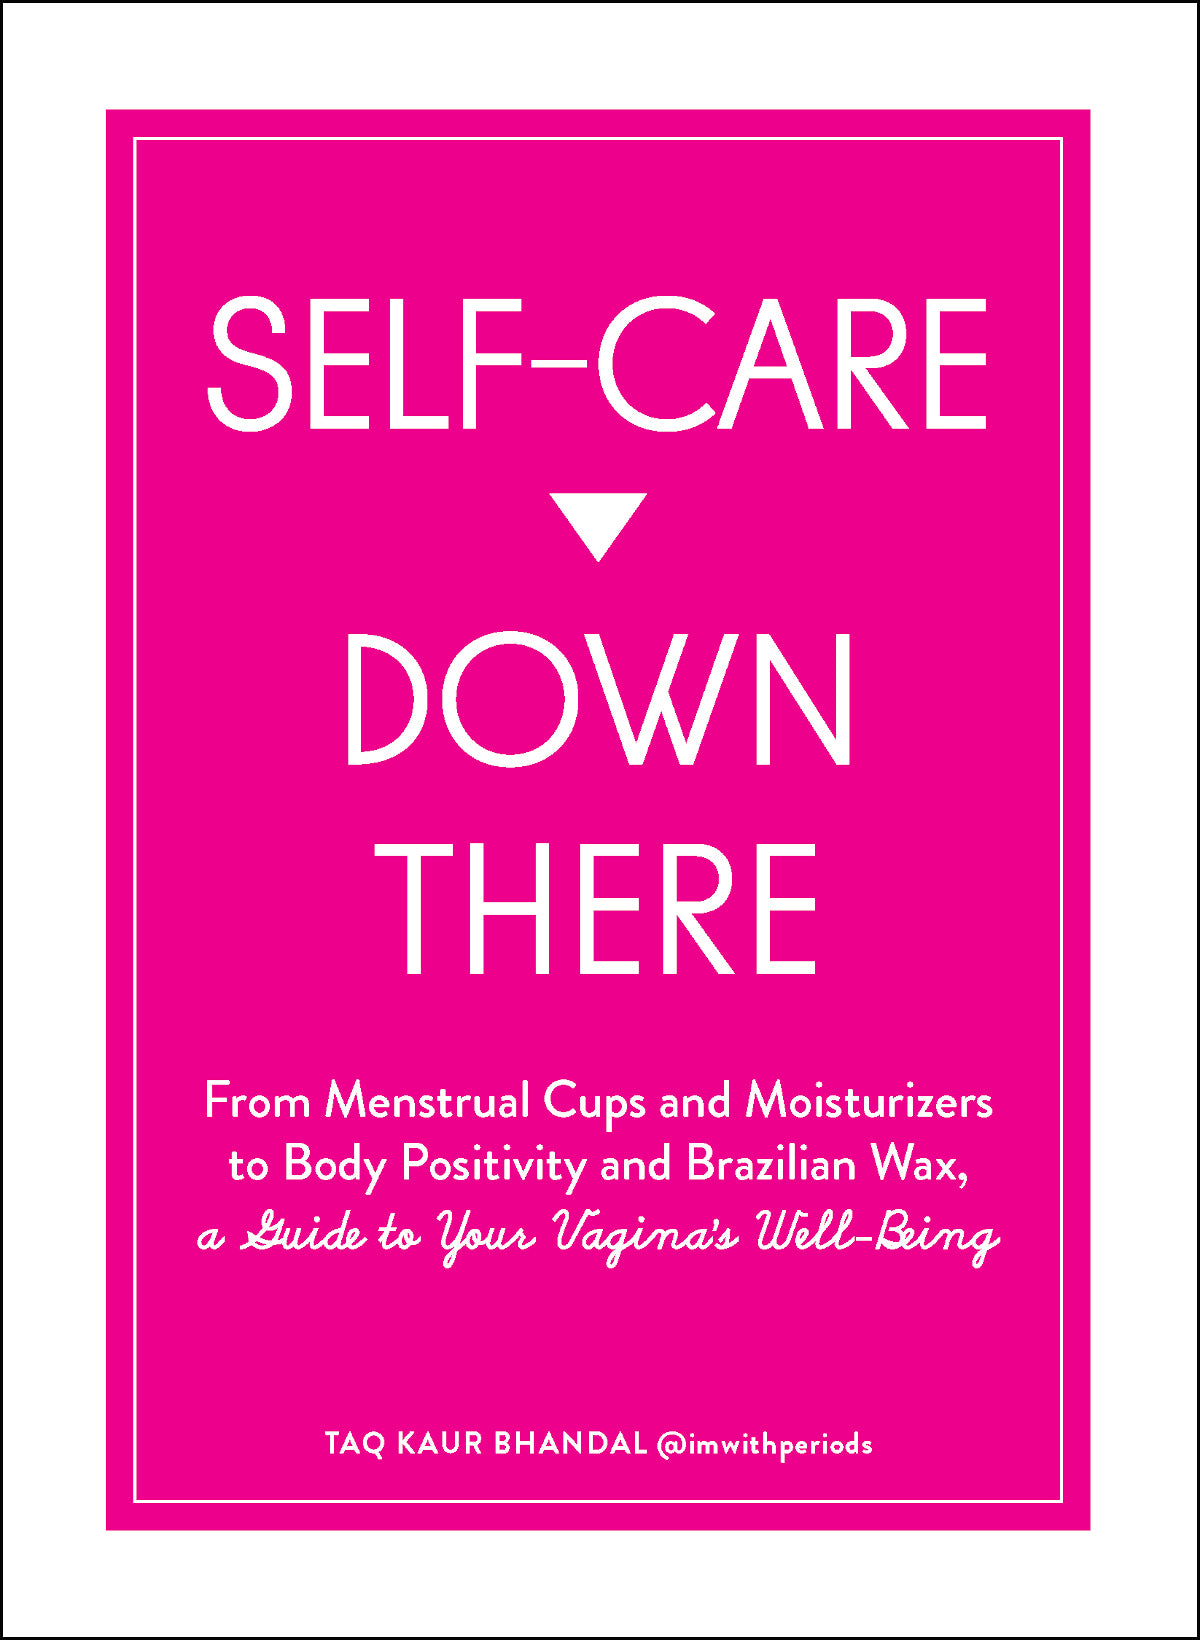 Self Care Down There: A GT Your Vagina's Well-Being - Simon & Schuster